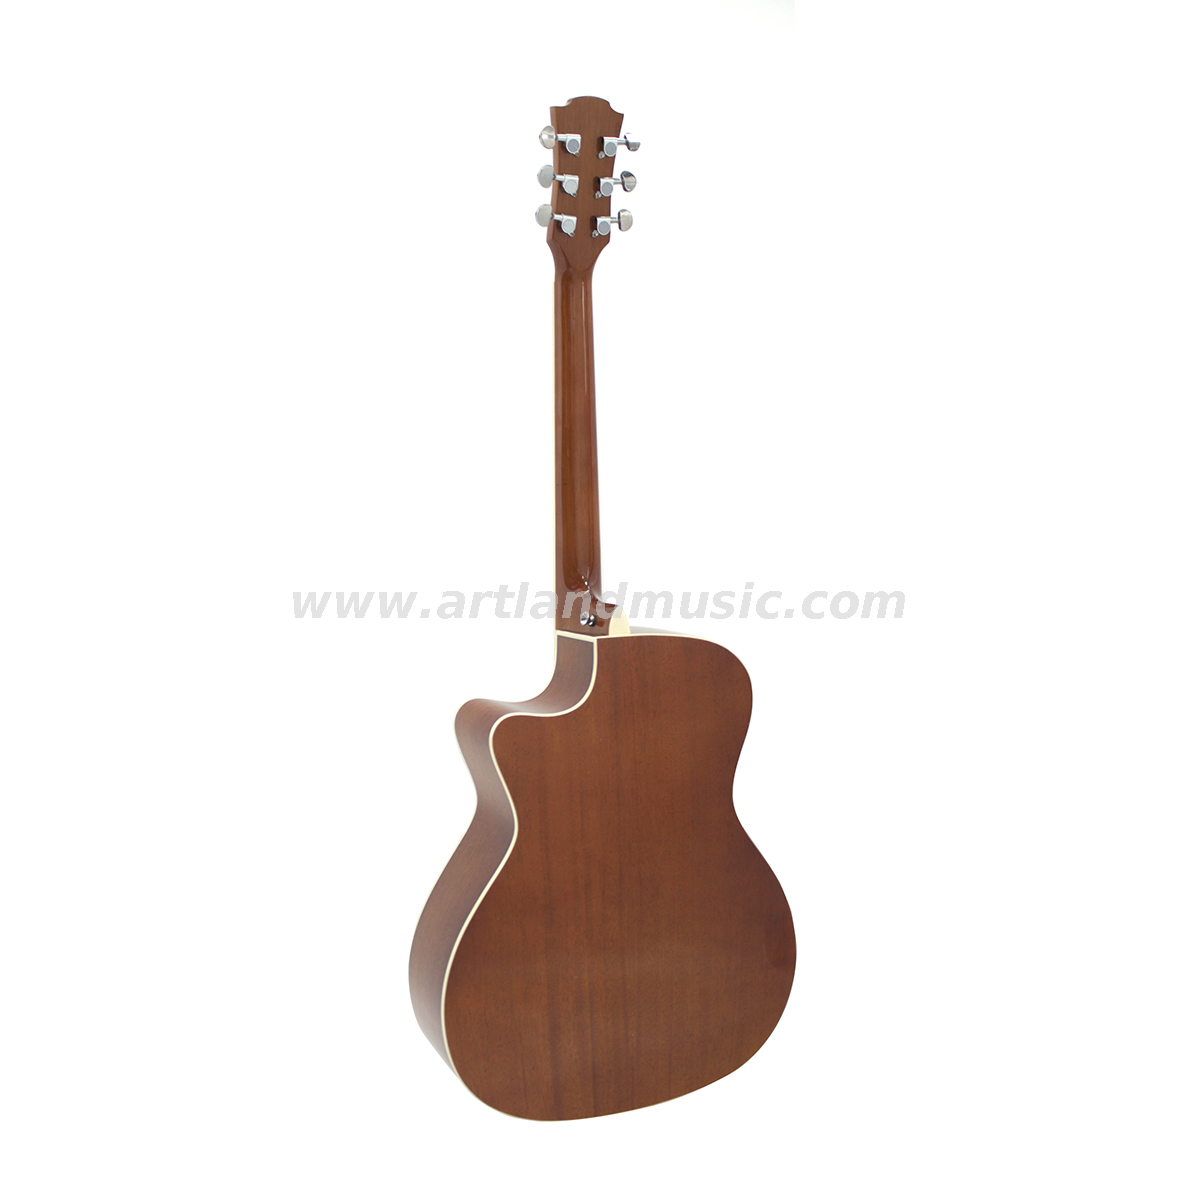 41 '' Solid Spruce Top Sapele Back Acoustic Guitar (AG4213)